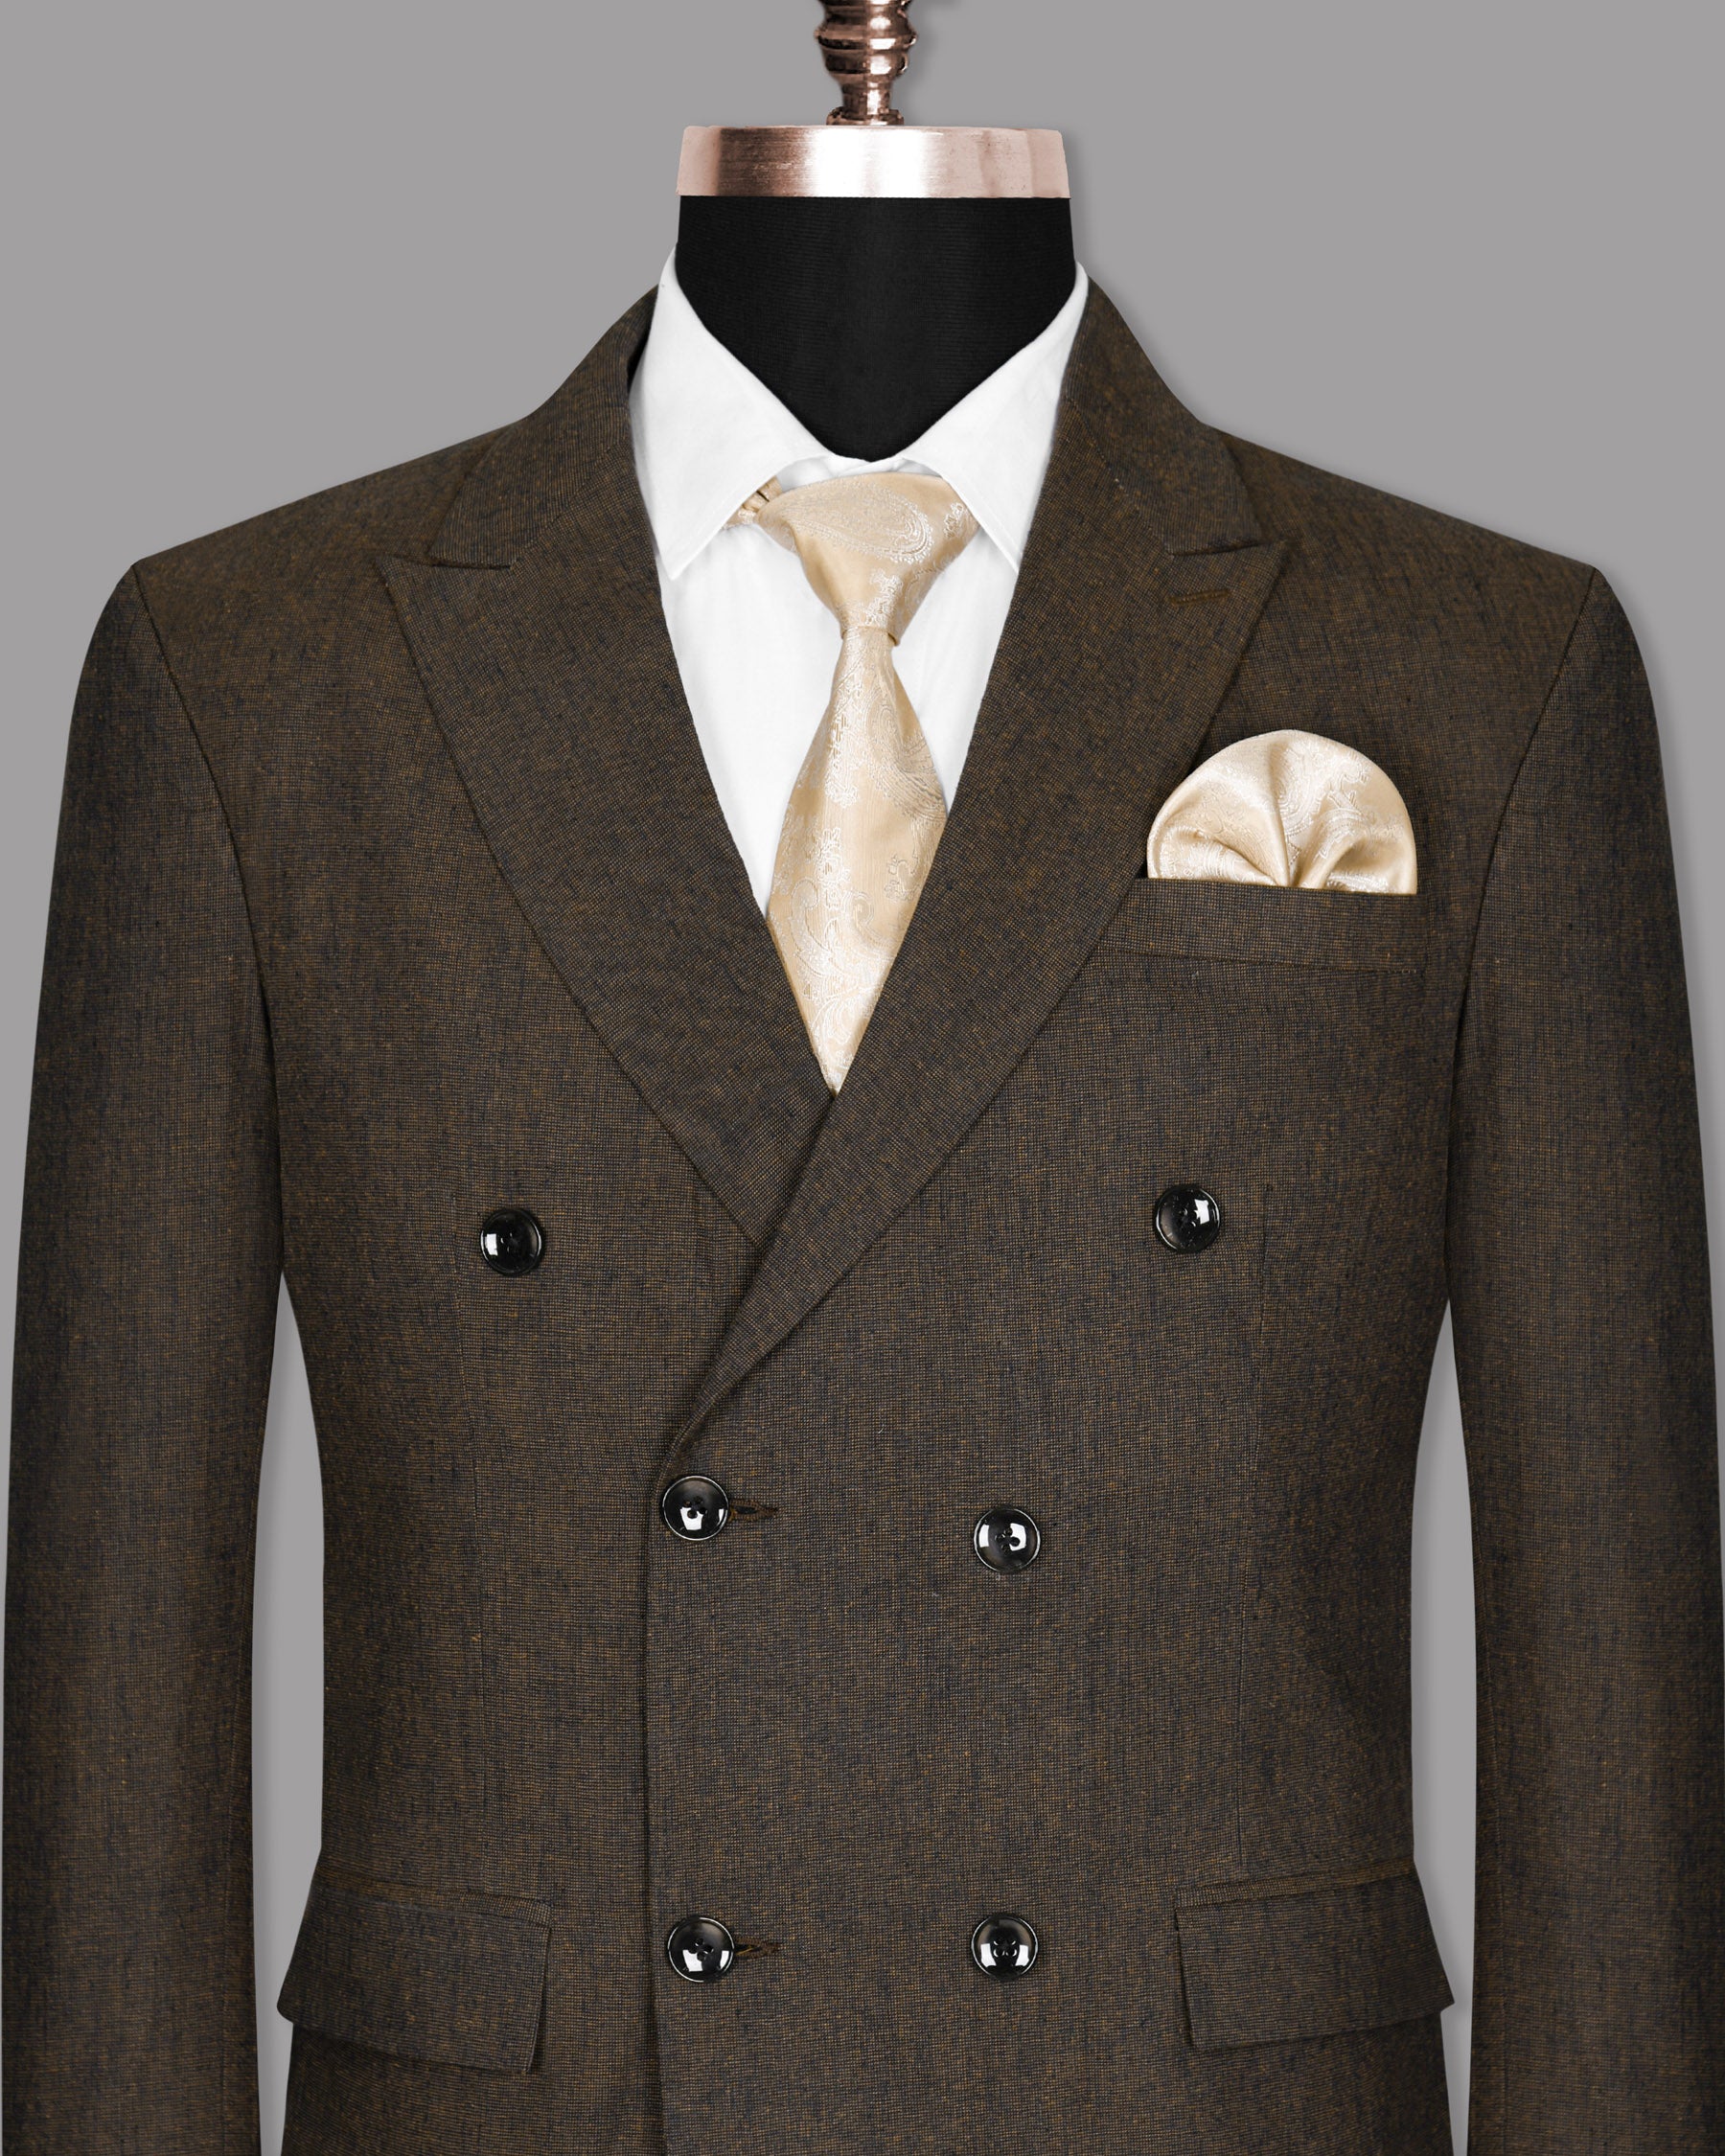 Chocolate Brown Linen Double Breasted Blazer BL1060-DB-36, BL1060-DB-48, BL1060-DB-50, BL1060-DB-52, BL1060-DB-54, BL1060-DB-40, BL1060-DB-42, BL1060-DB-46, BL1060-DB-56, BL1060-DB-58, BL1060-DB-60, BL1060-DB-38, BL1060-DB-44